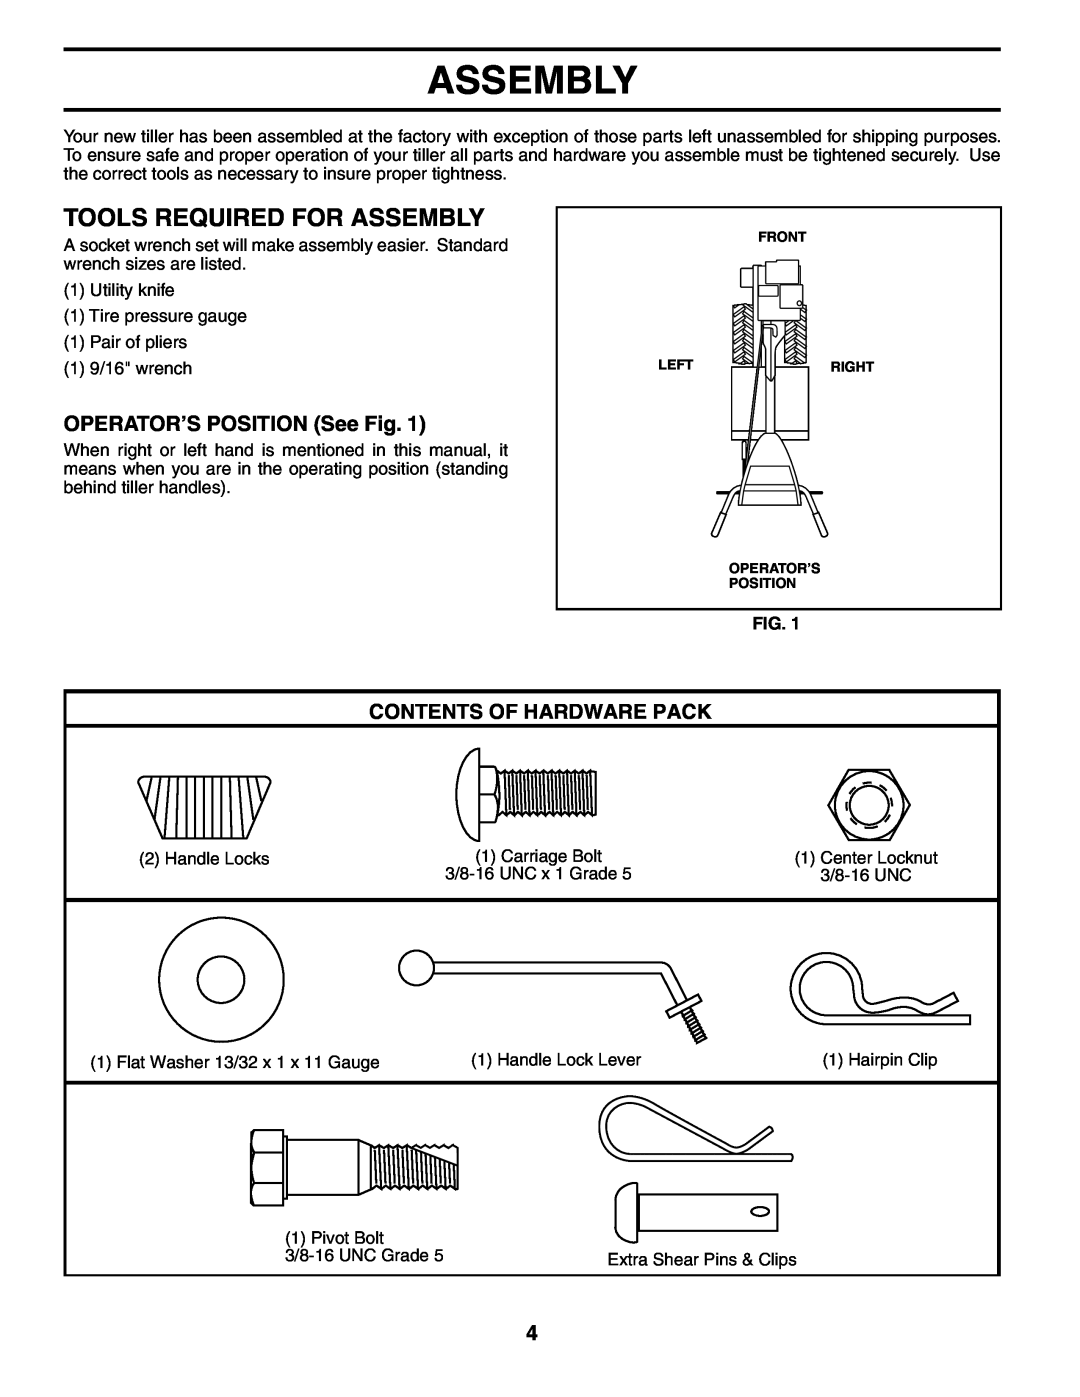 Husqvarna 500RTT owner manual Tools Required For Assembly, OPERATOR’S POSITION See Fig, Contents Of Hardware Pack 